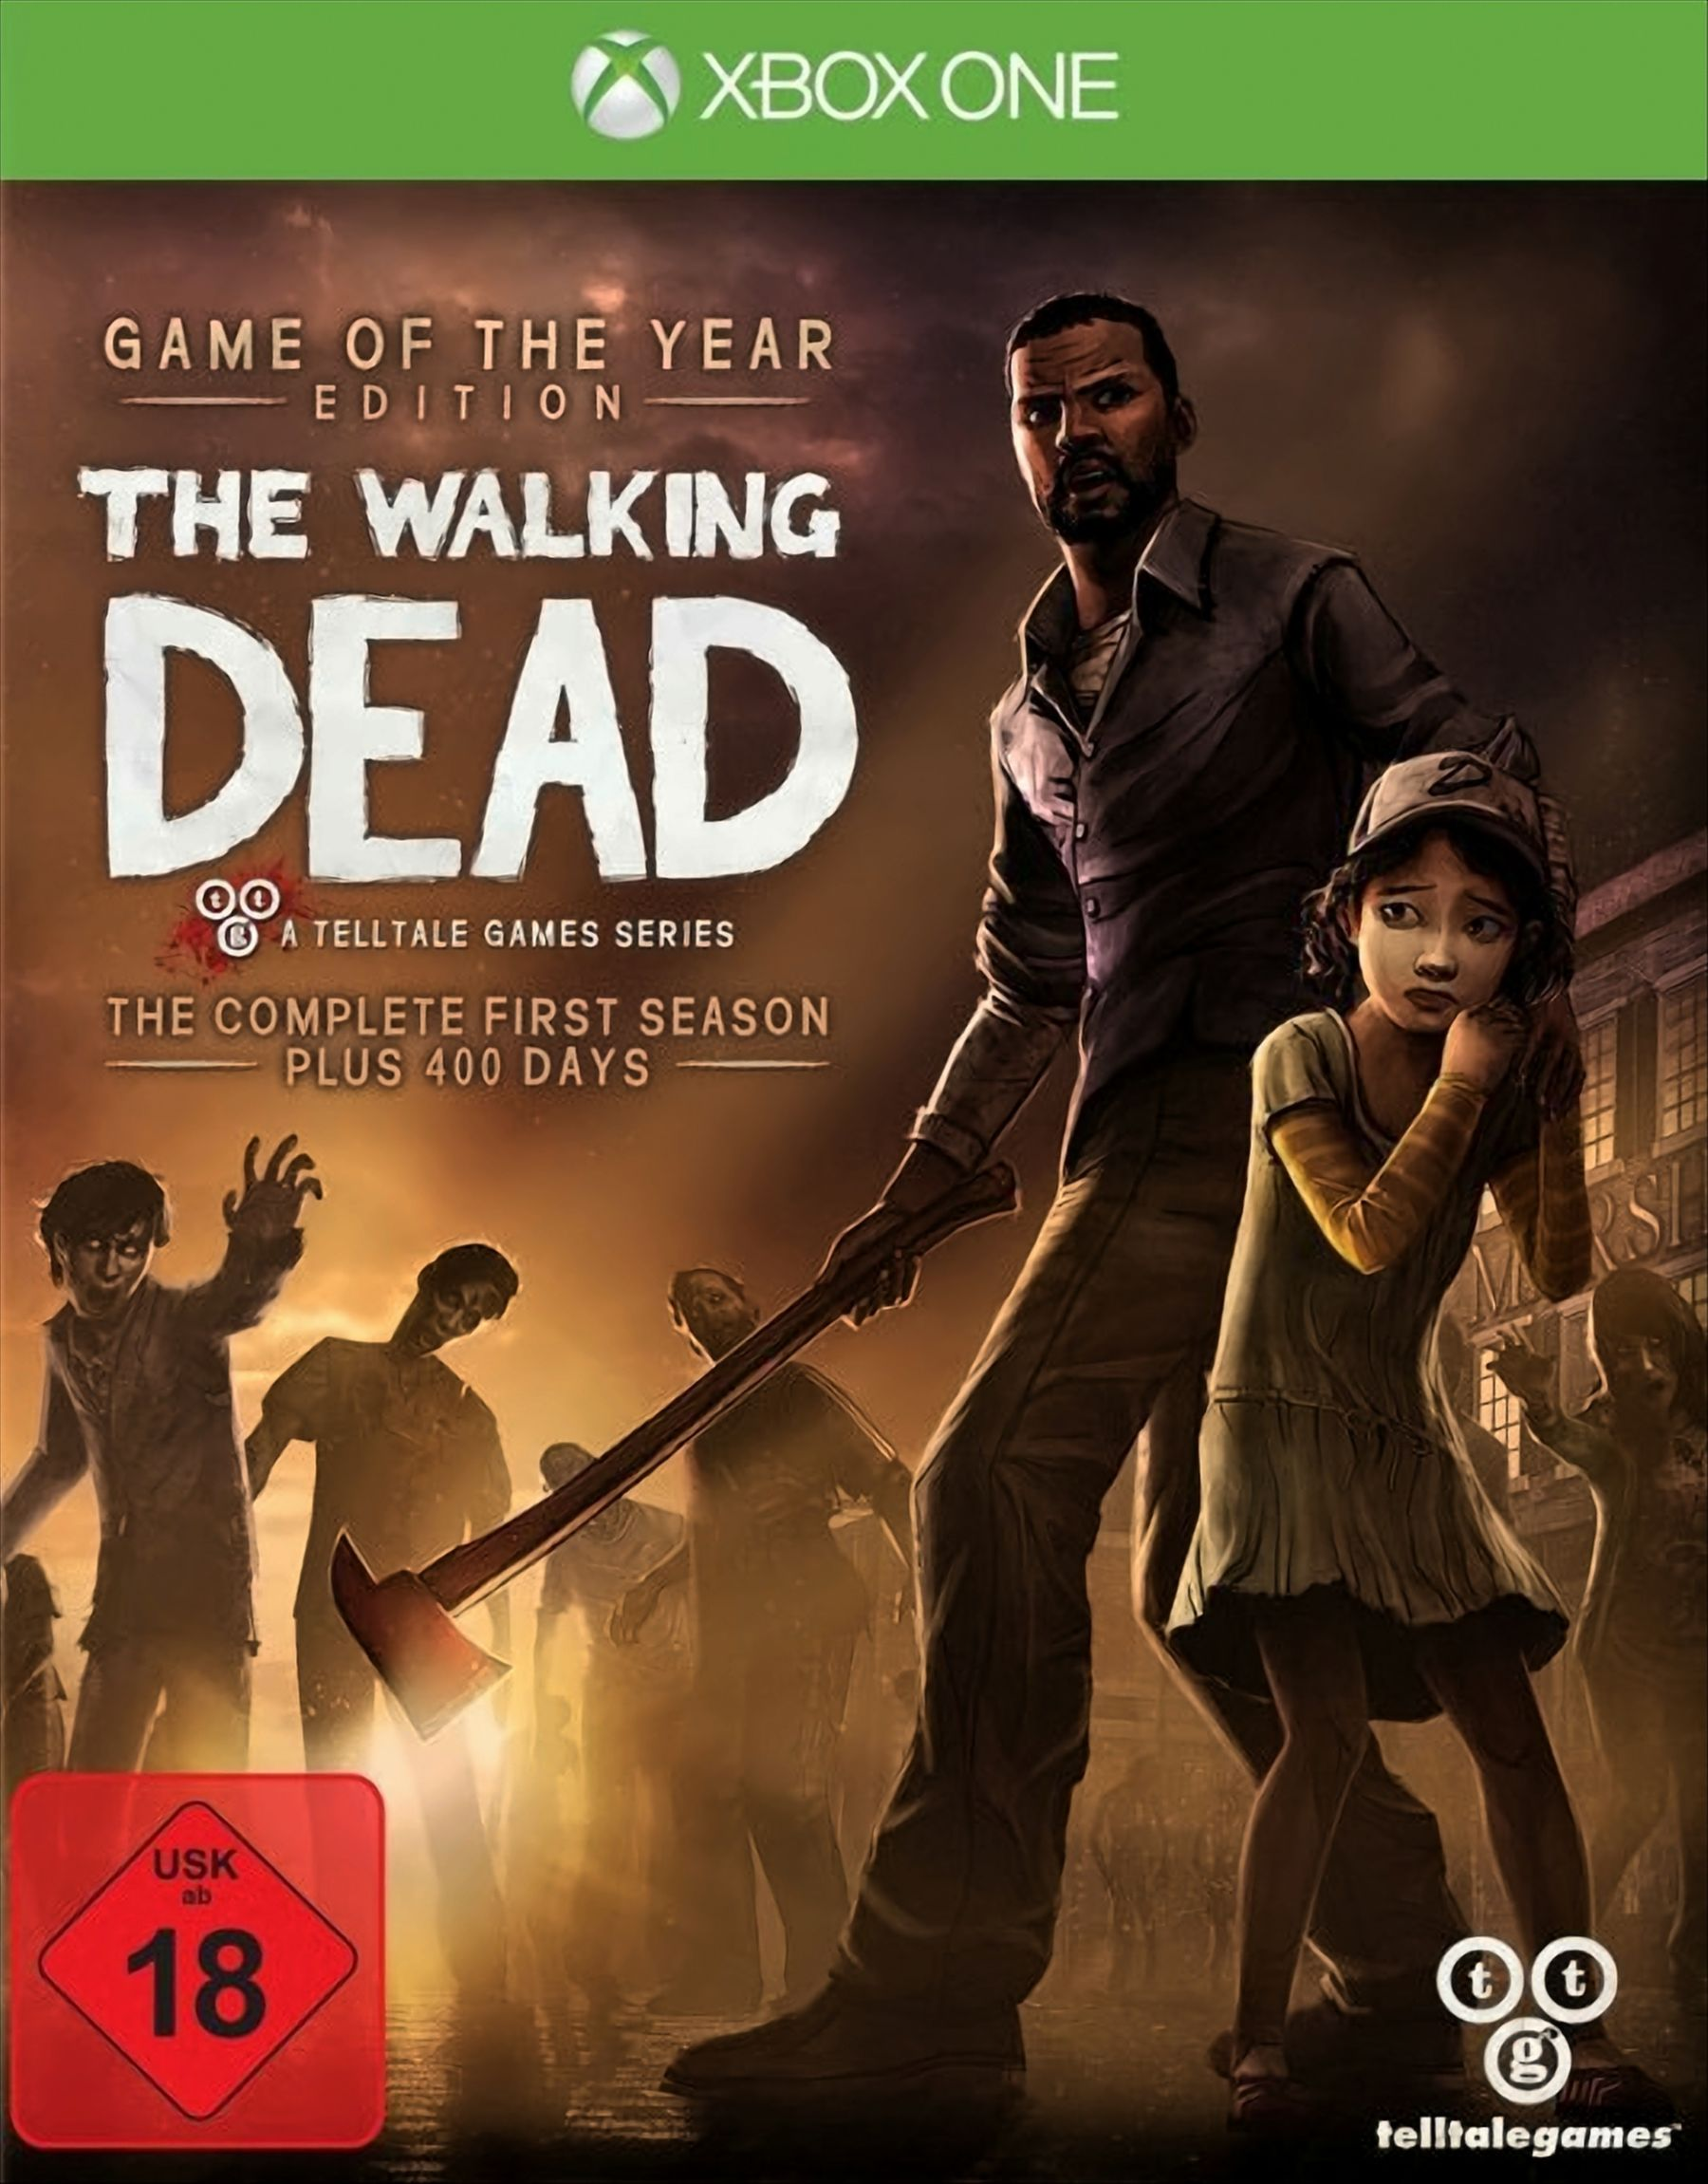 The Walking Dead The One] Of Edition - - [Xbox Game Year